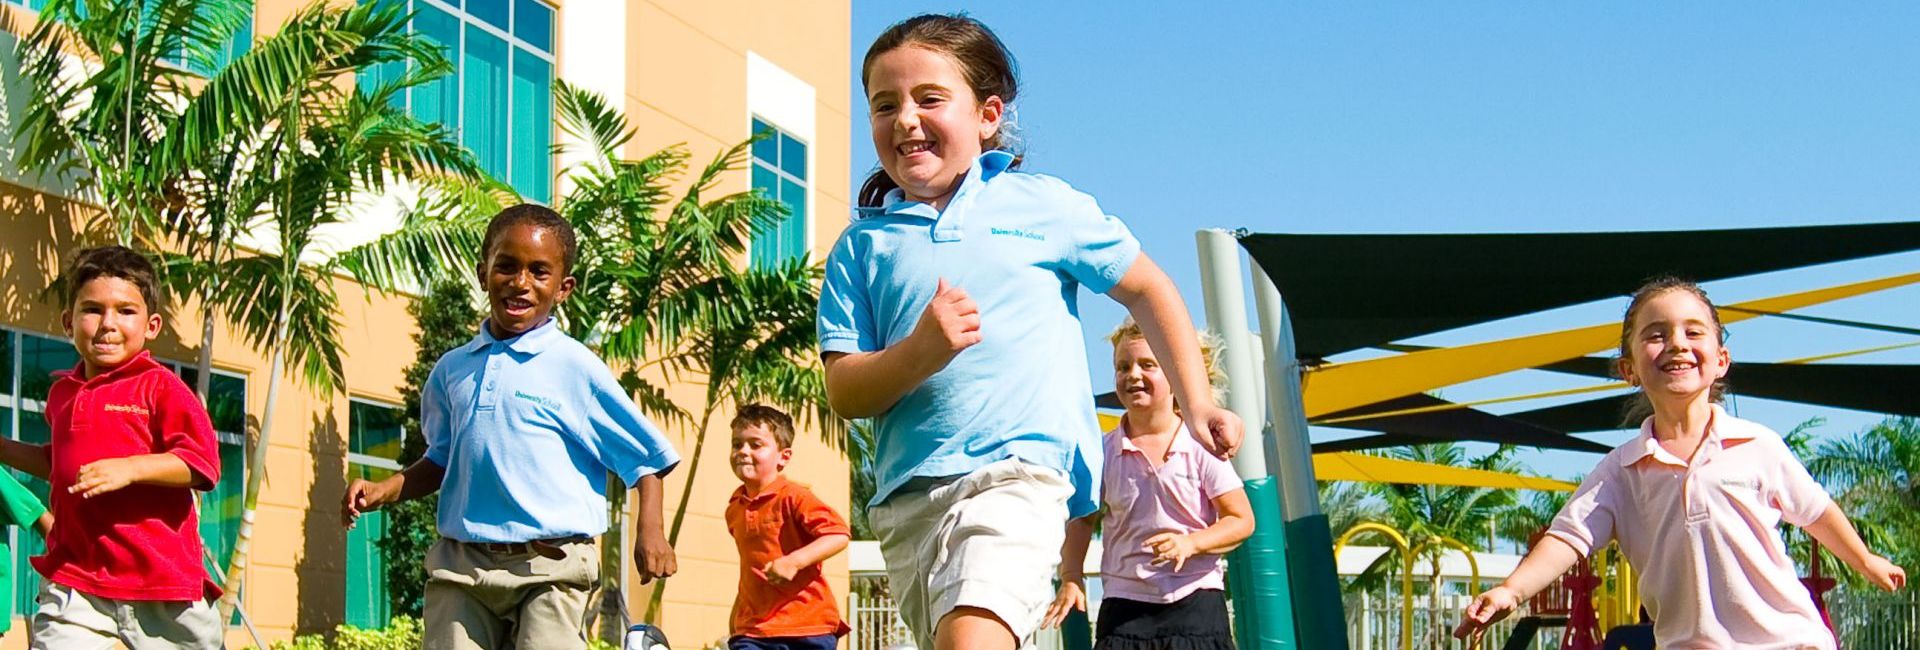 Featured image of Group of children smiling running at playground